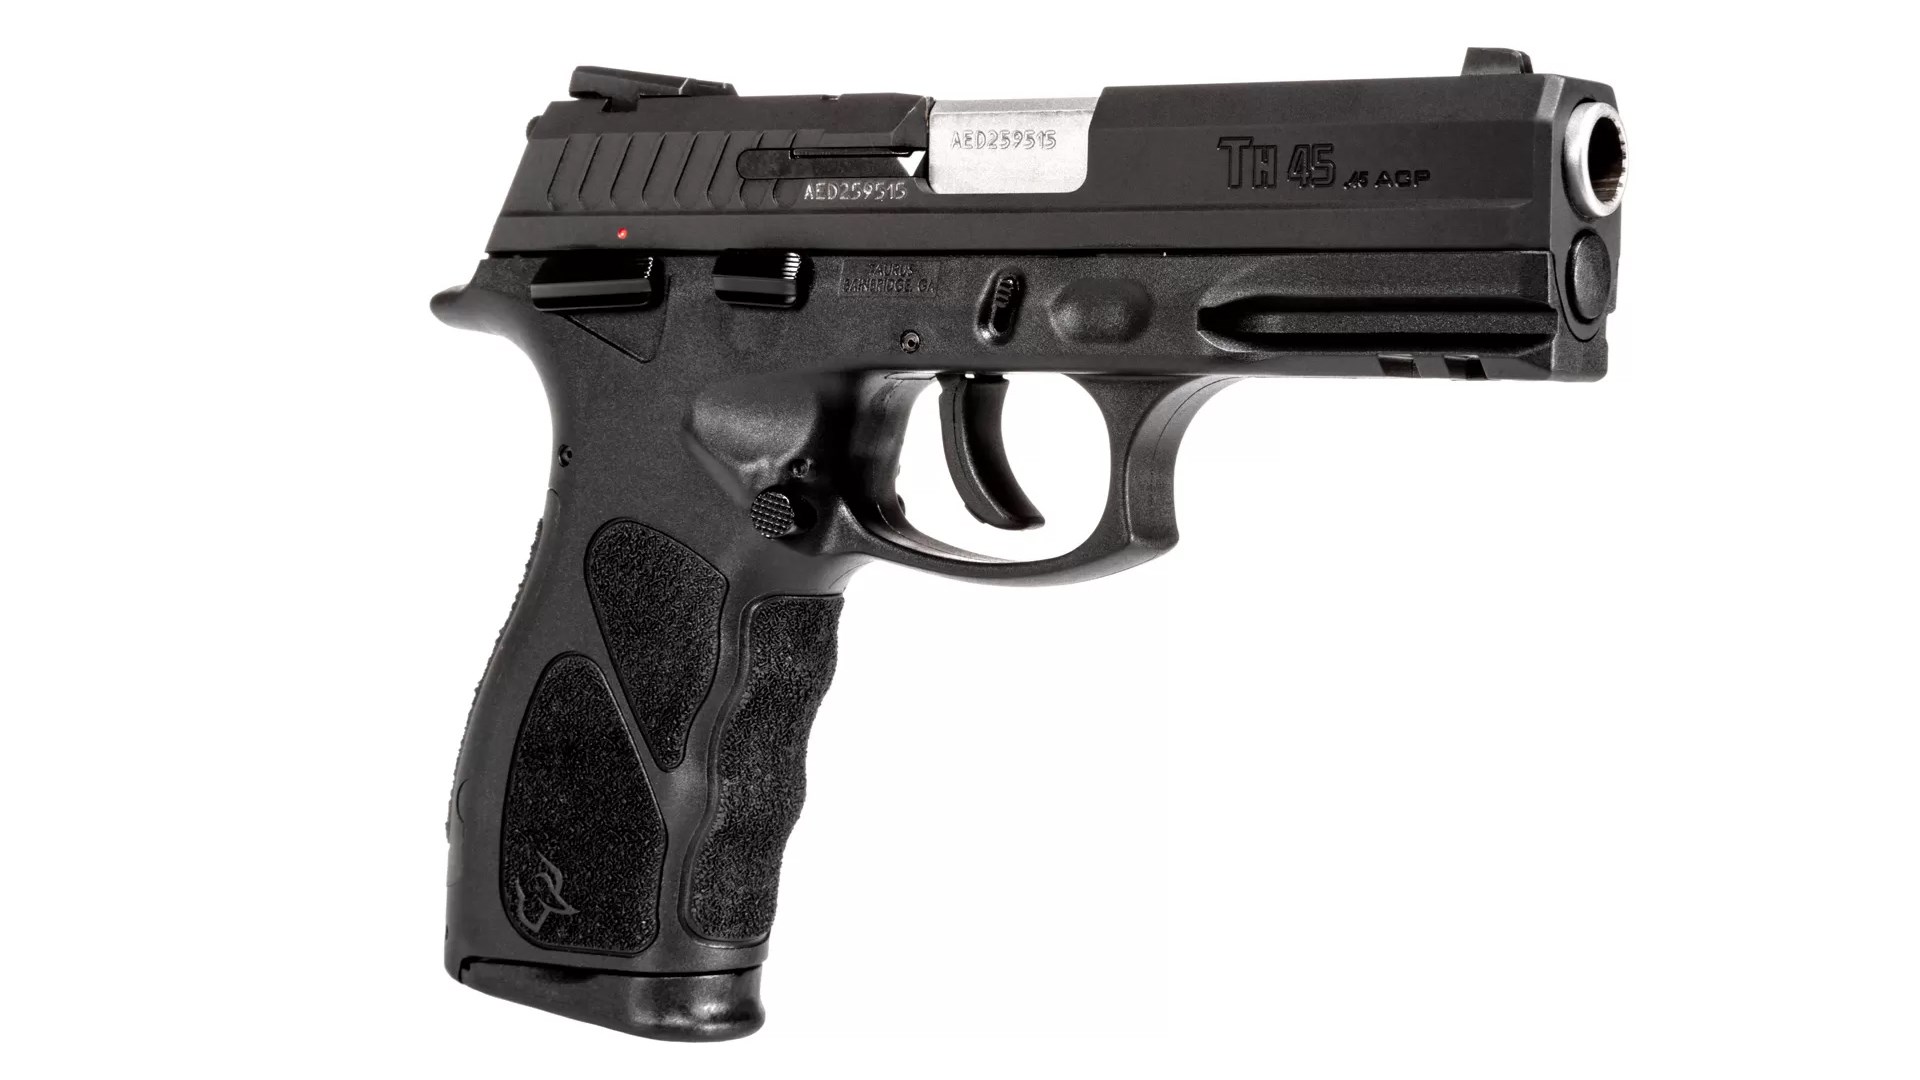 Right side of the all-black Taurus TH45 pistol in .45 ACP.